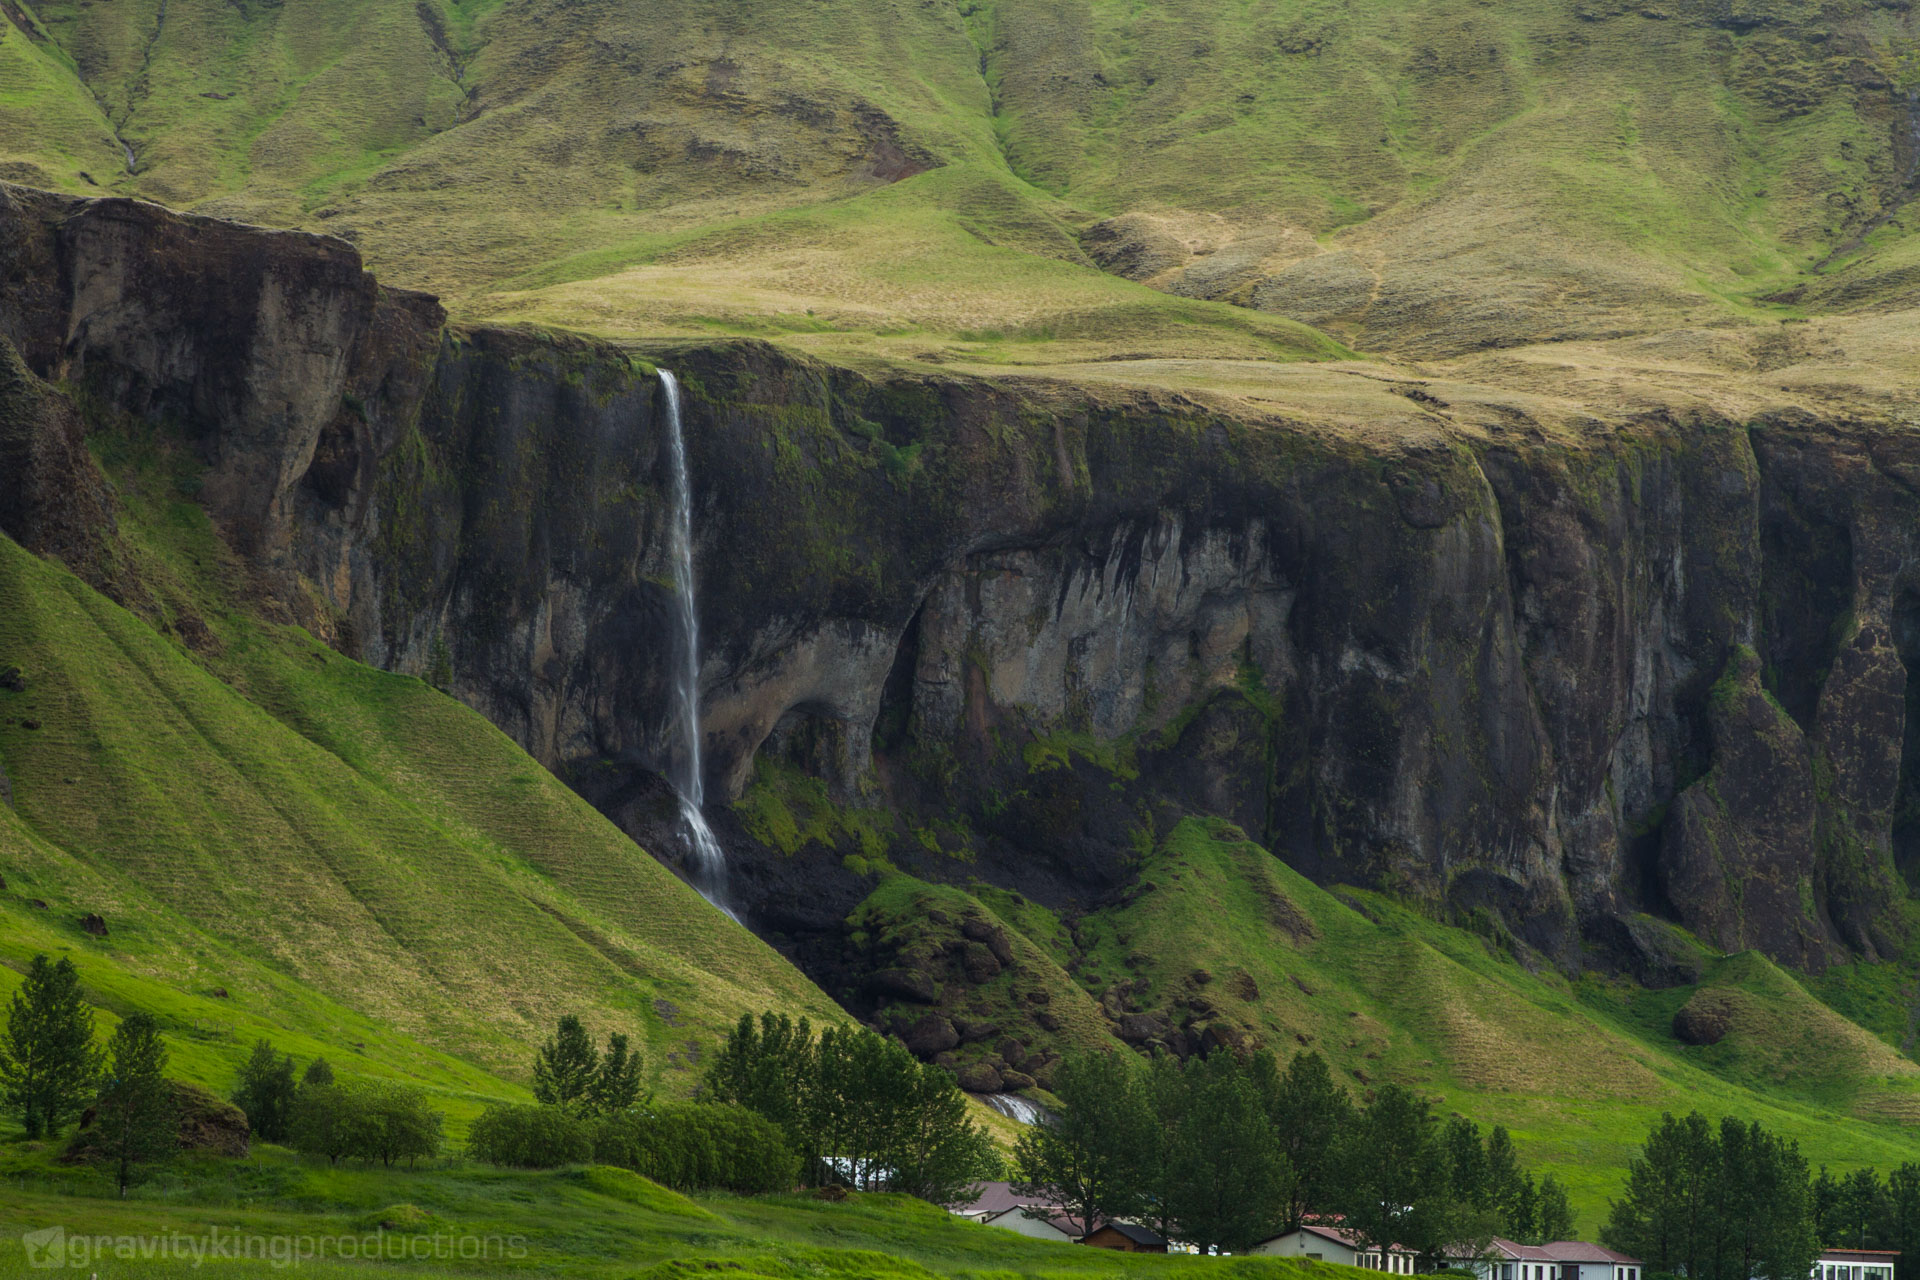 One of many beautiful wateralls in Iceland. Couldn't even find the name of this one.